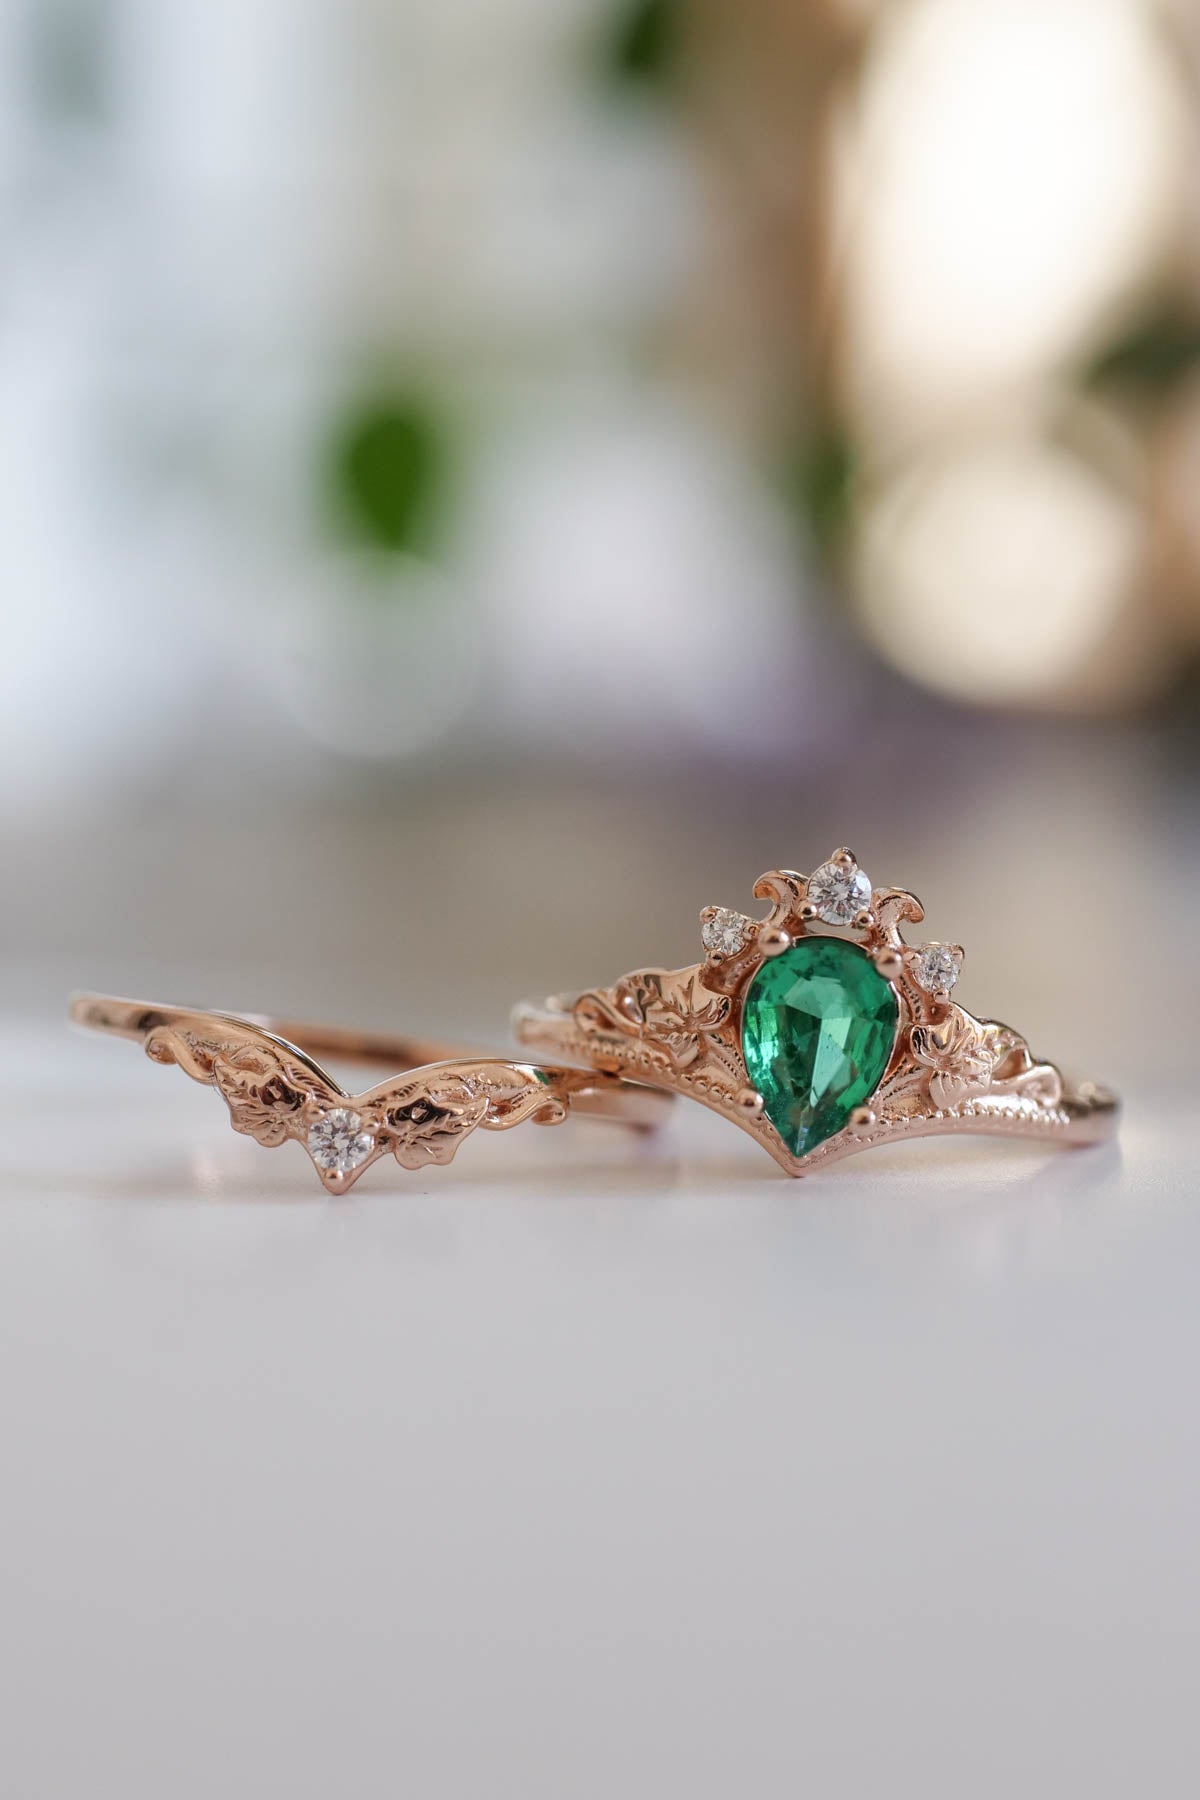 engagement ring wnd wedding ring for women, rose gold ring with natural pear cut emerald